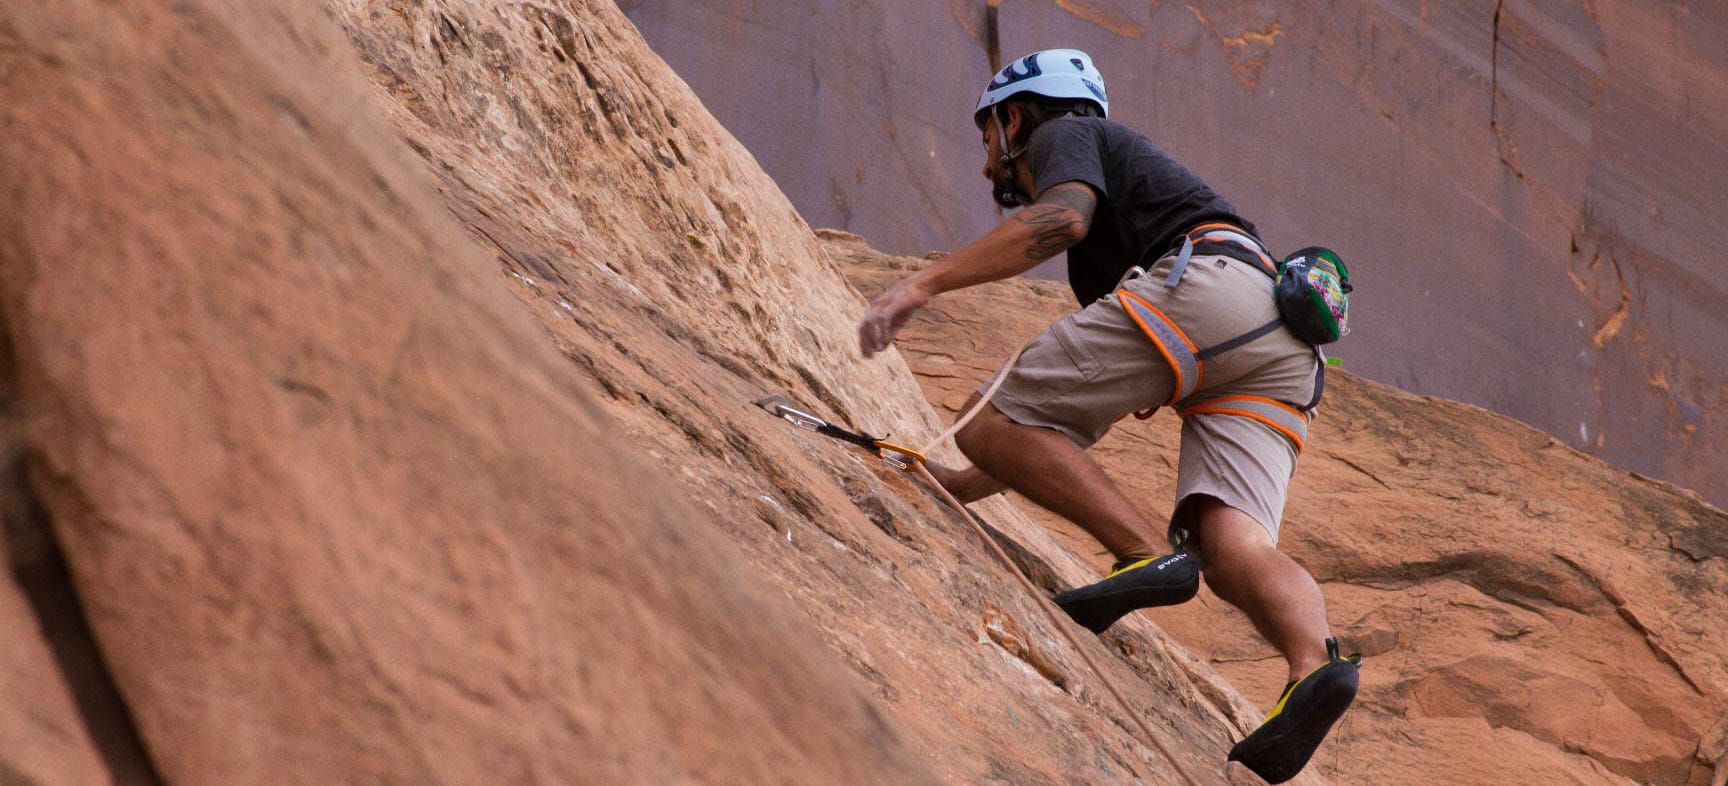 Rock climbing grades explained: What 